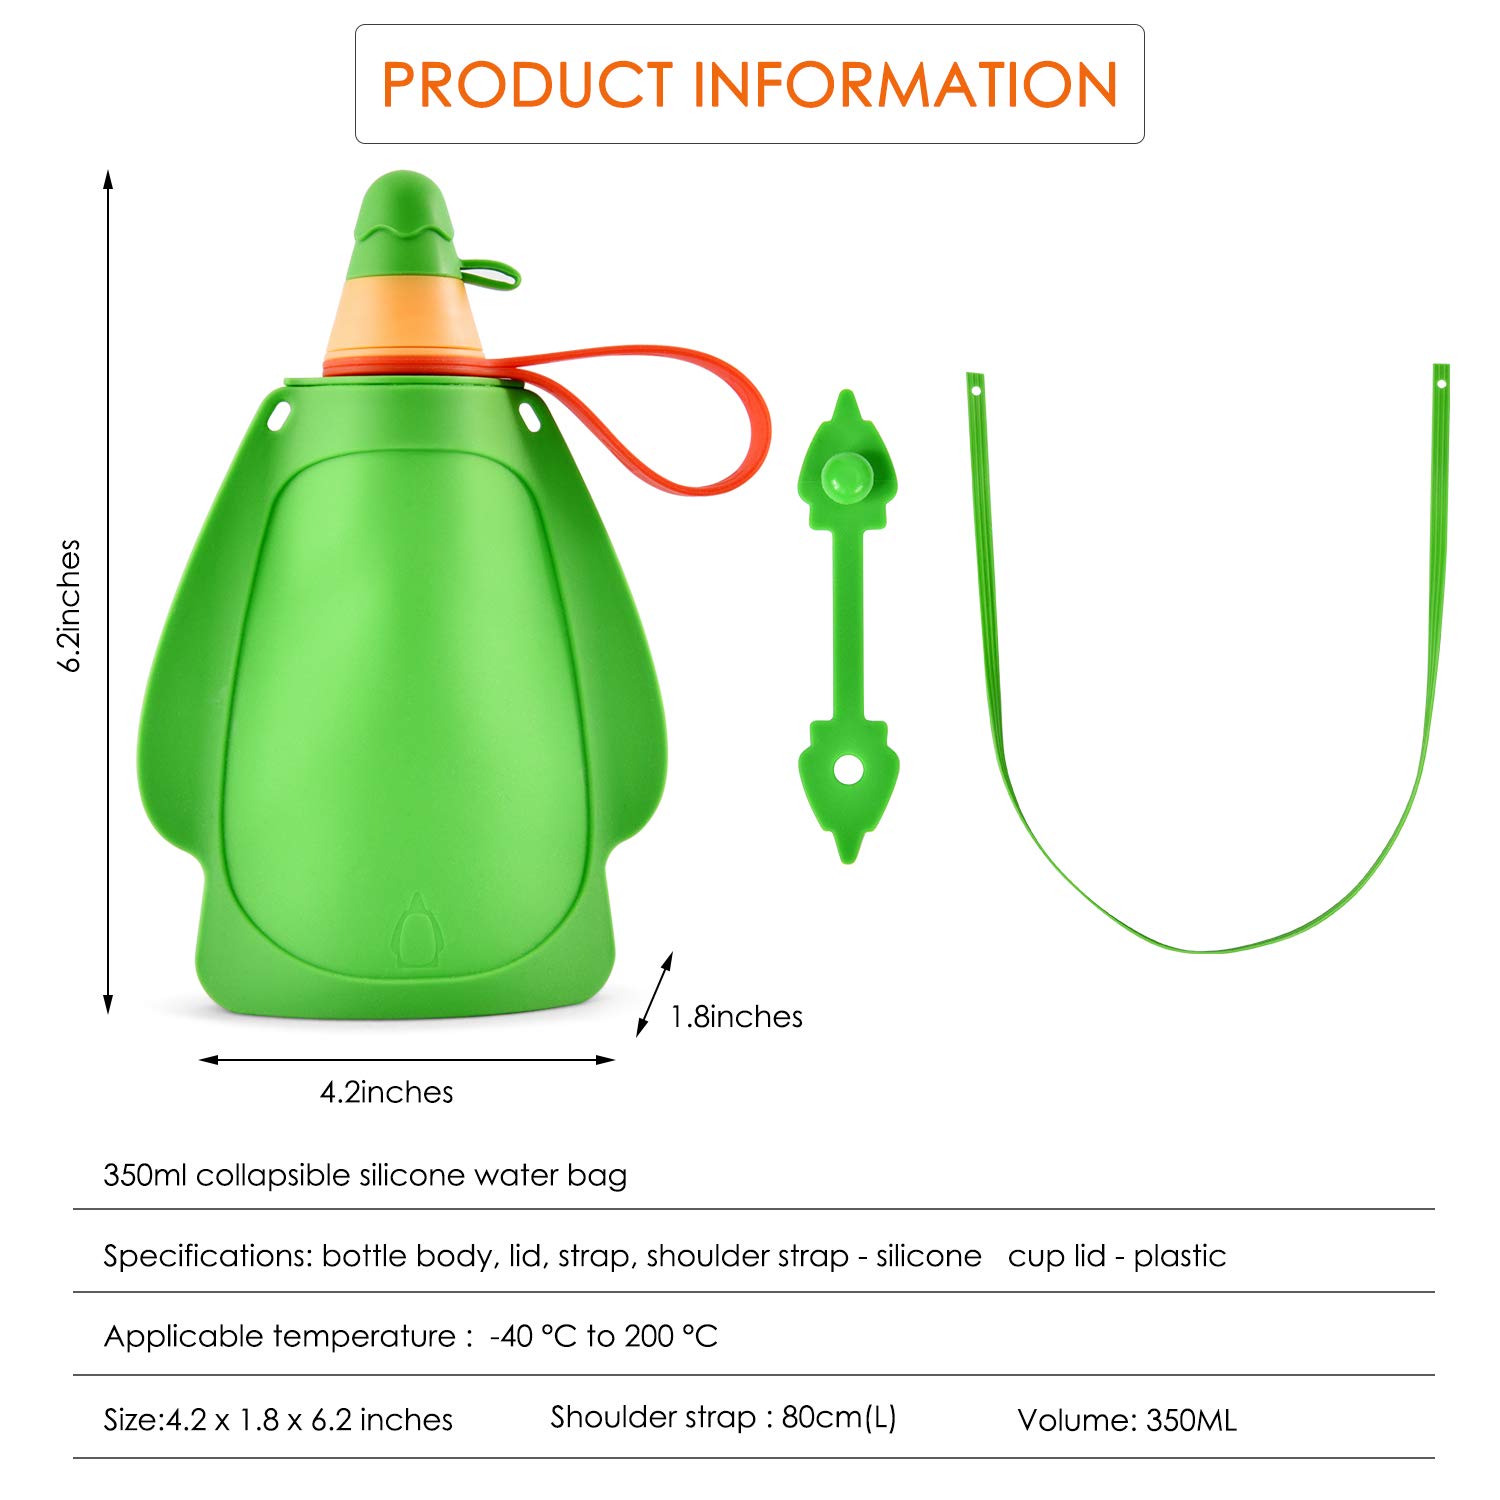 Hot Foldable Silicone Water Bottle For Children Portable Leakproof Water Bottle-305ml Water Bag,Bottle With Shoulder Strap